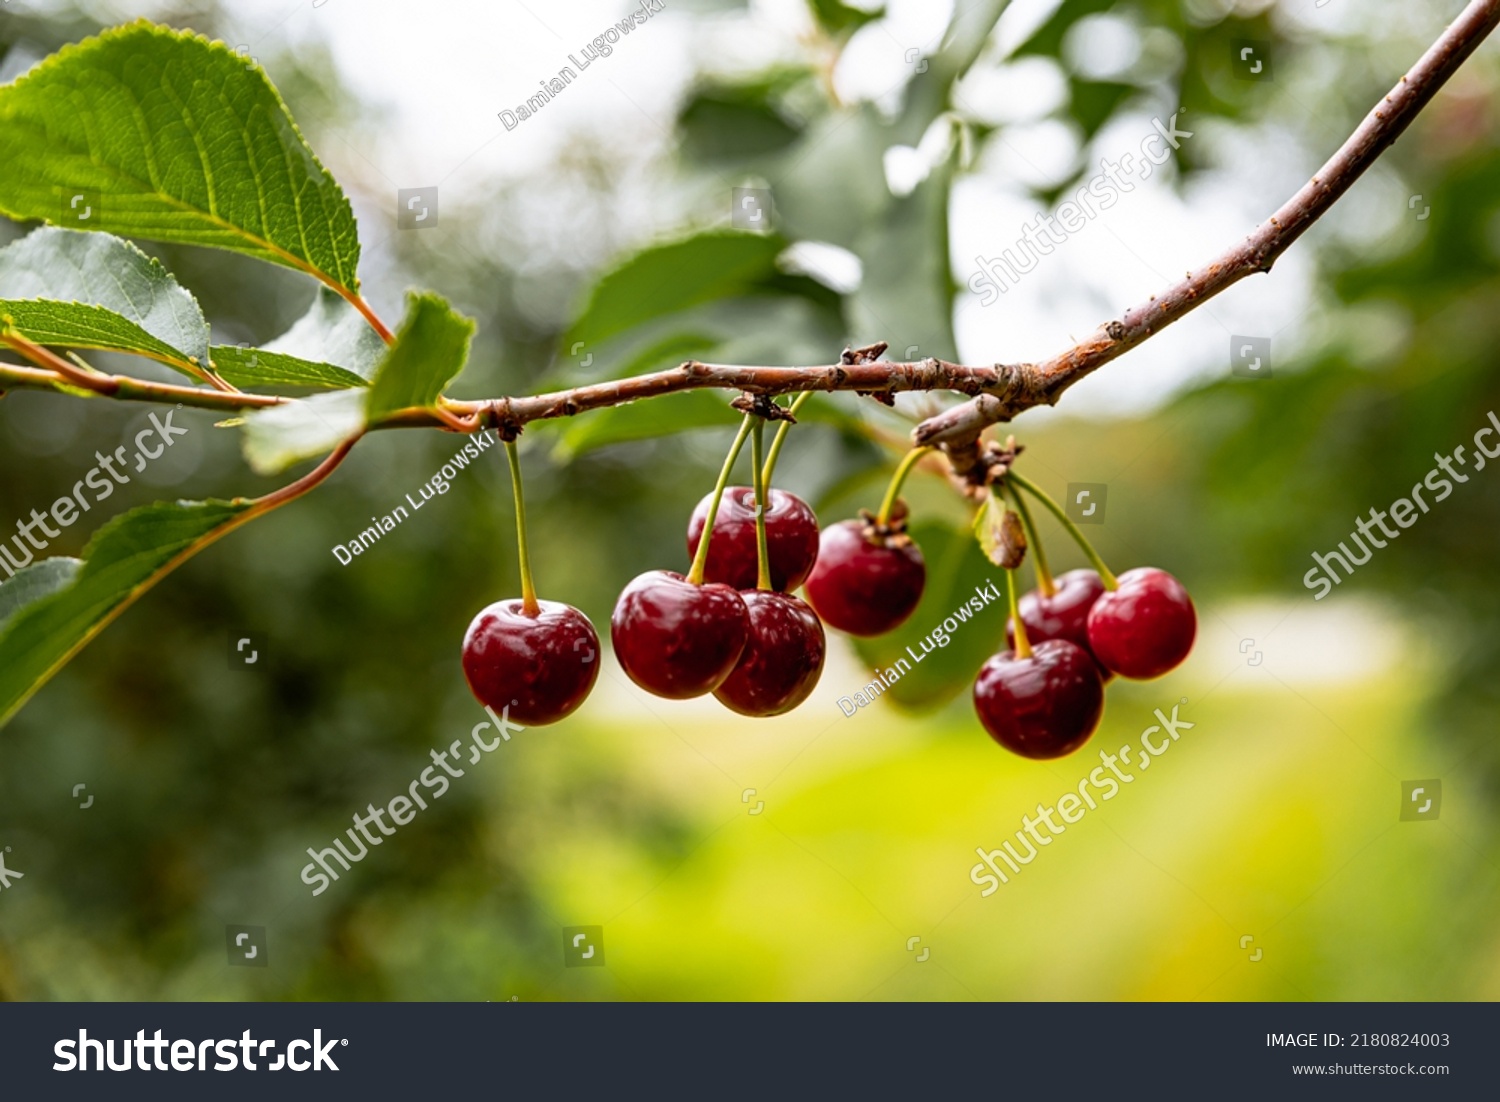 Ripe cherries hanging on a cherry tree branch against green background. Fruits growing in organic cherry orchard on a sunny day #2180824003